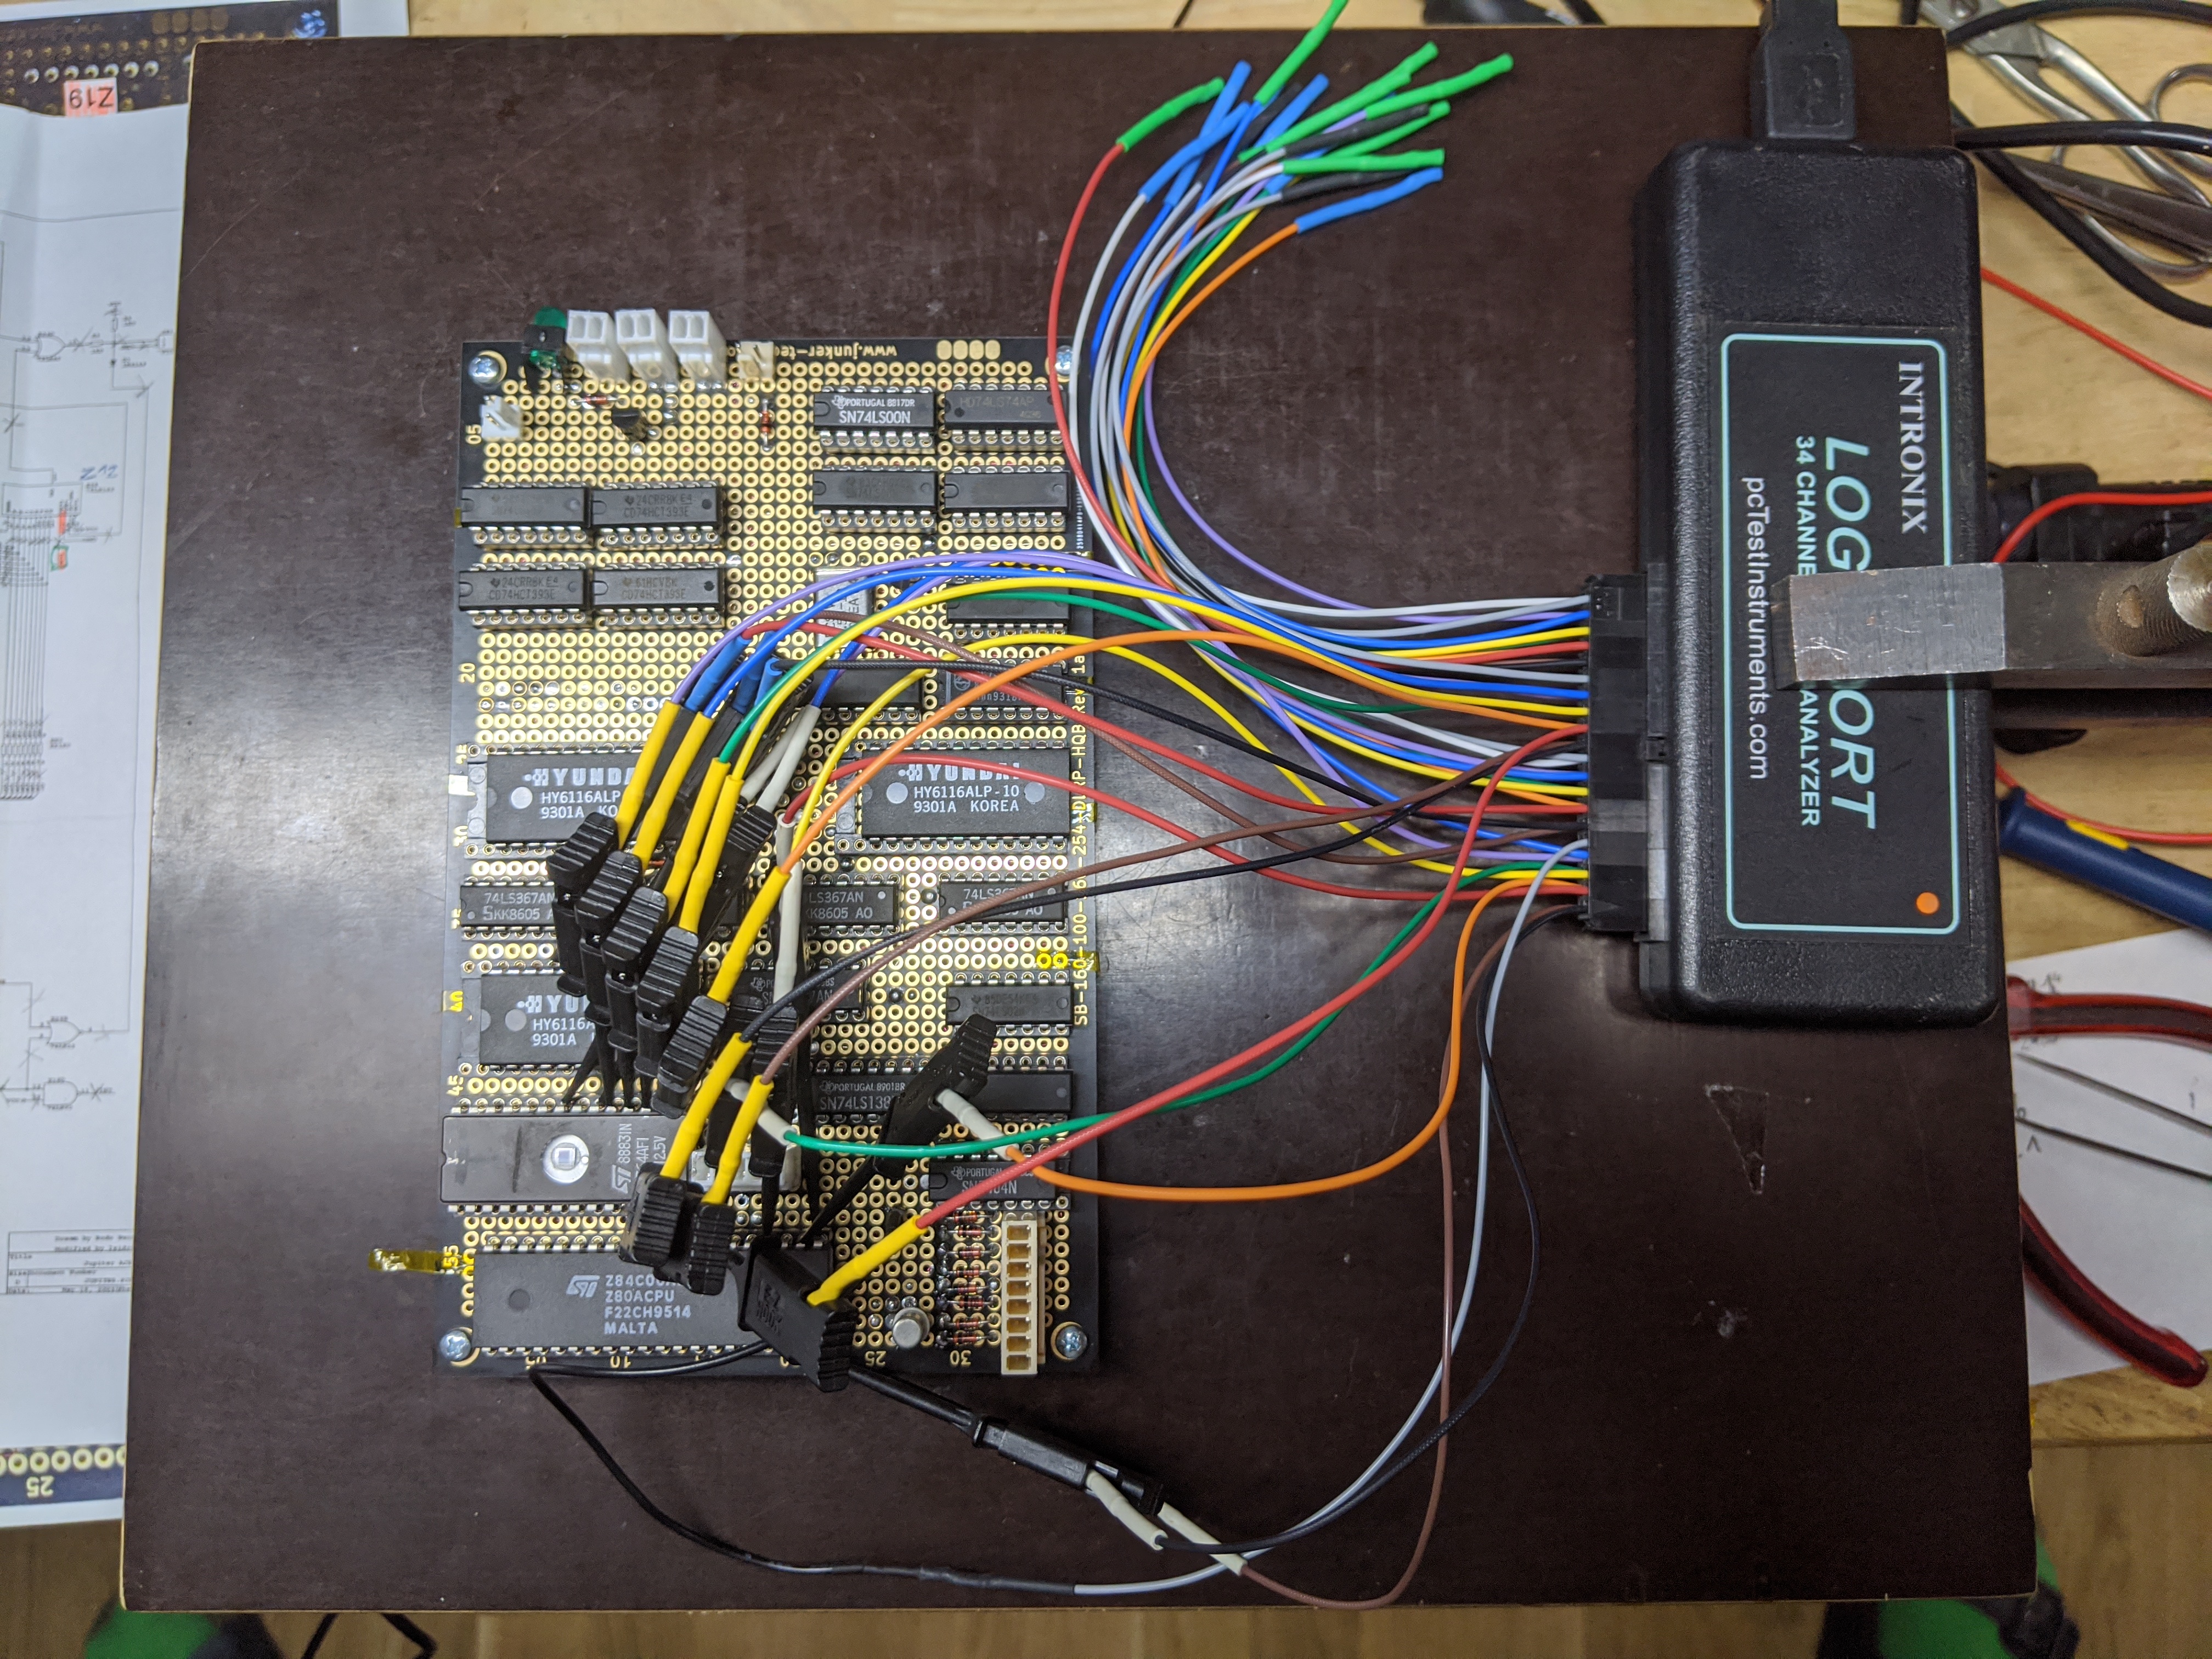 Logic Analyzer Probes Connected